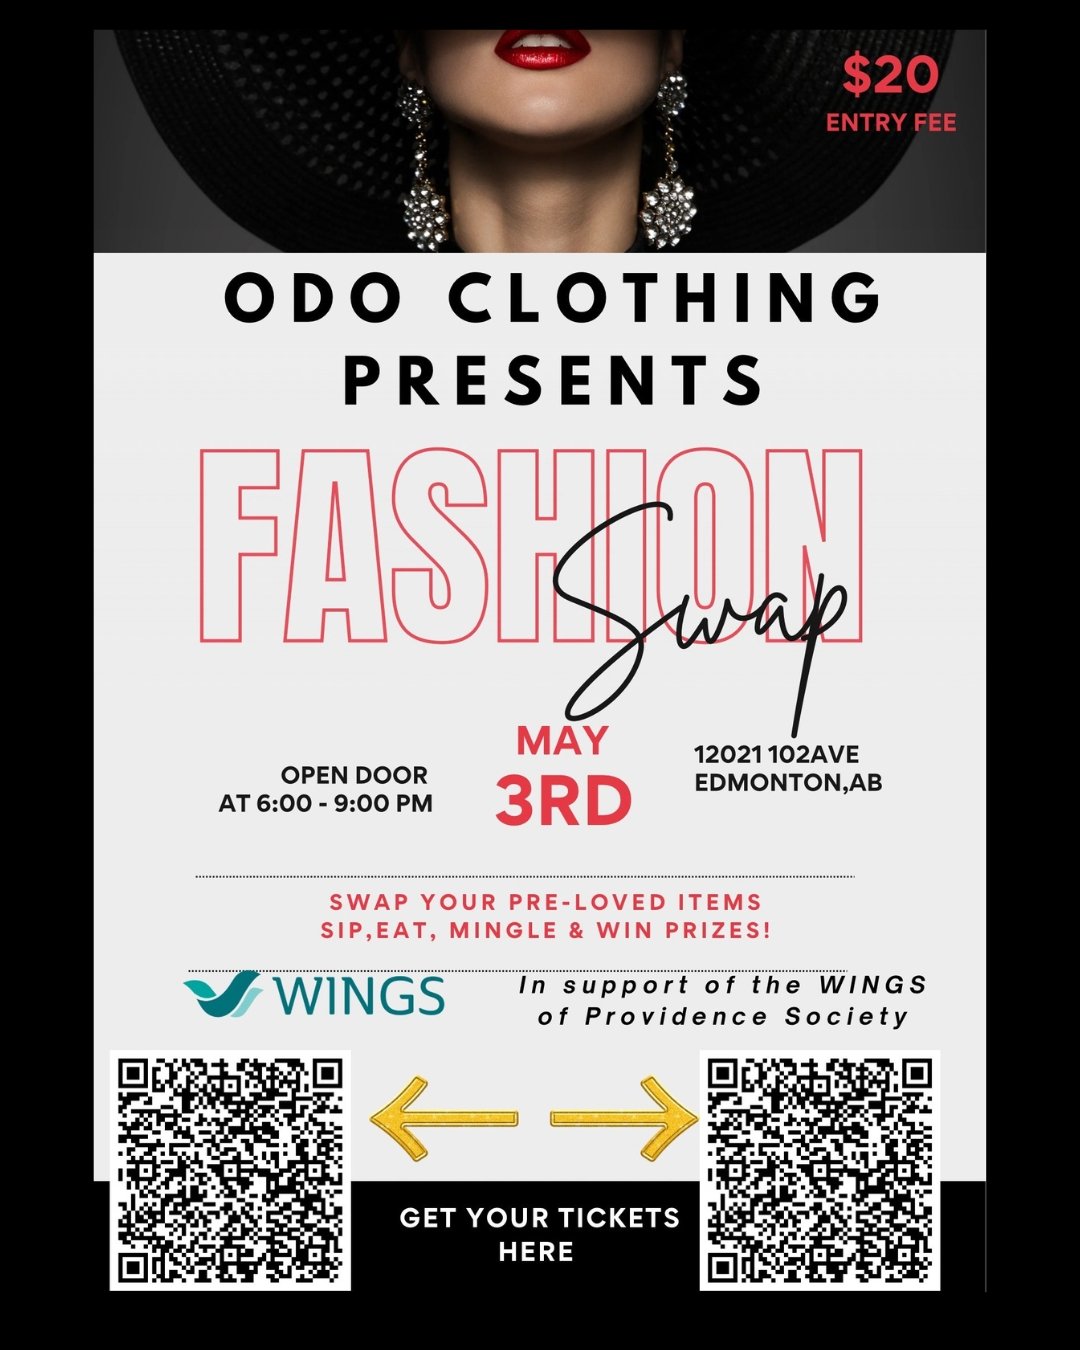 Have you heard that ODO CLOTHING (@shop.odo) is holding a Fashion Swap Event in support of WINGS? 

Check out Odo Clothing's amazing event -- and help make a difference for the women and children at WINGS who are fleeing domestic violence. 

Here are